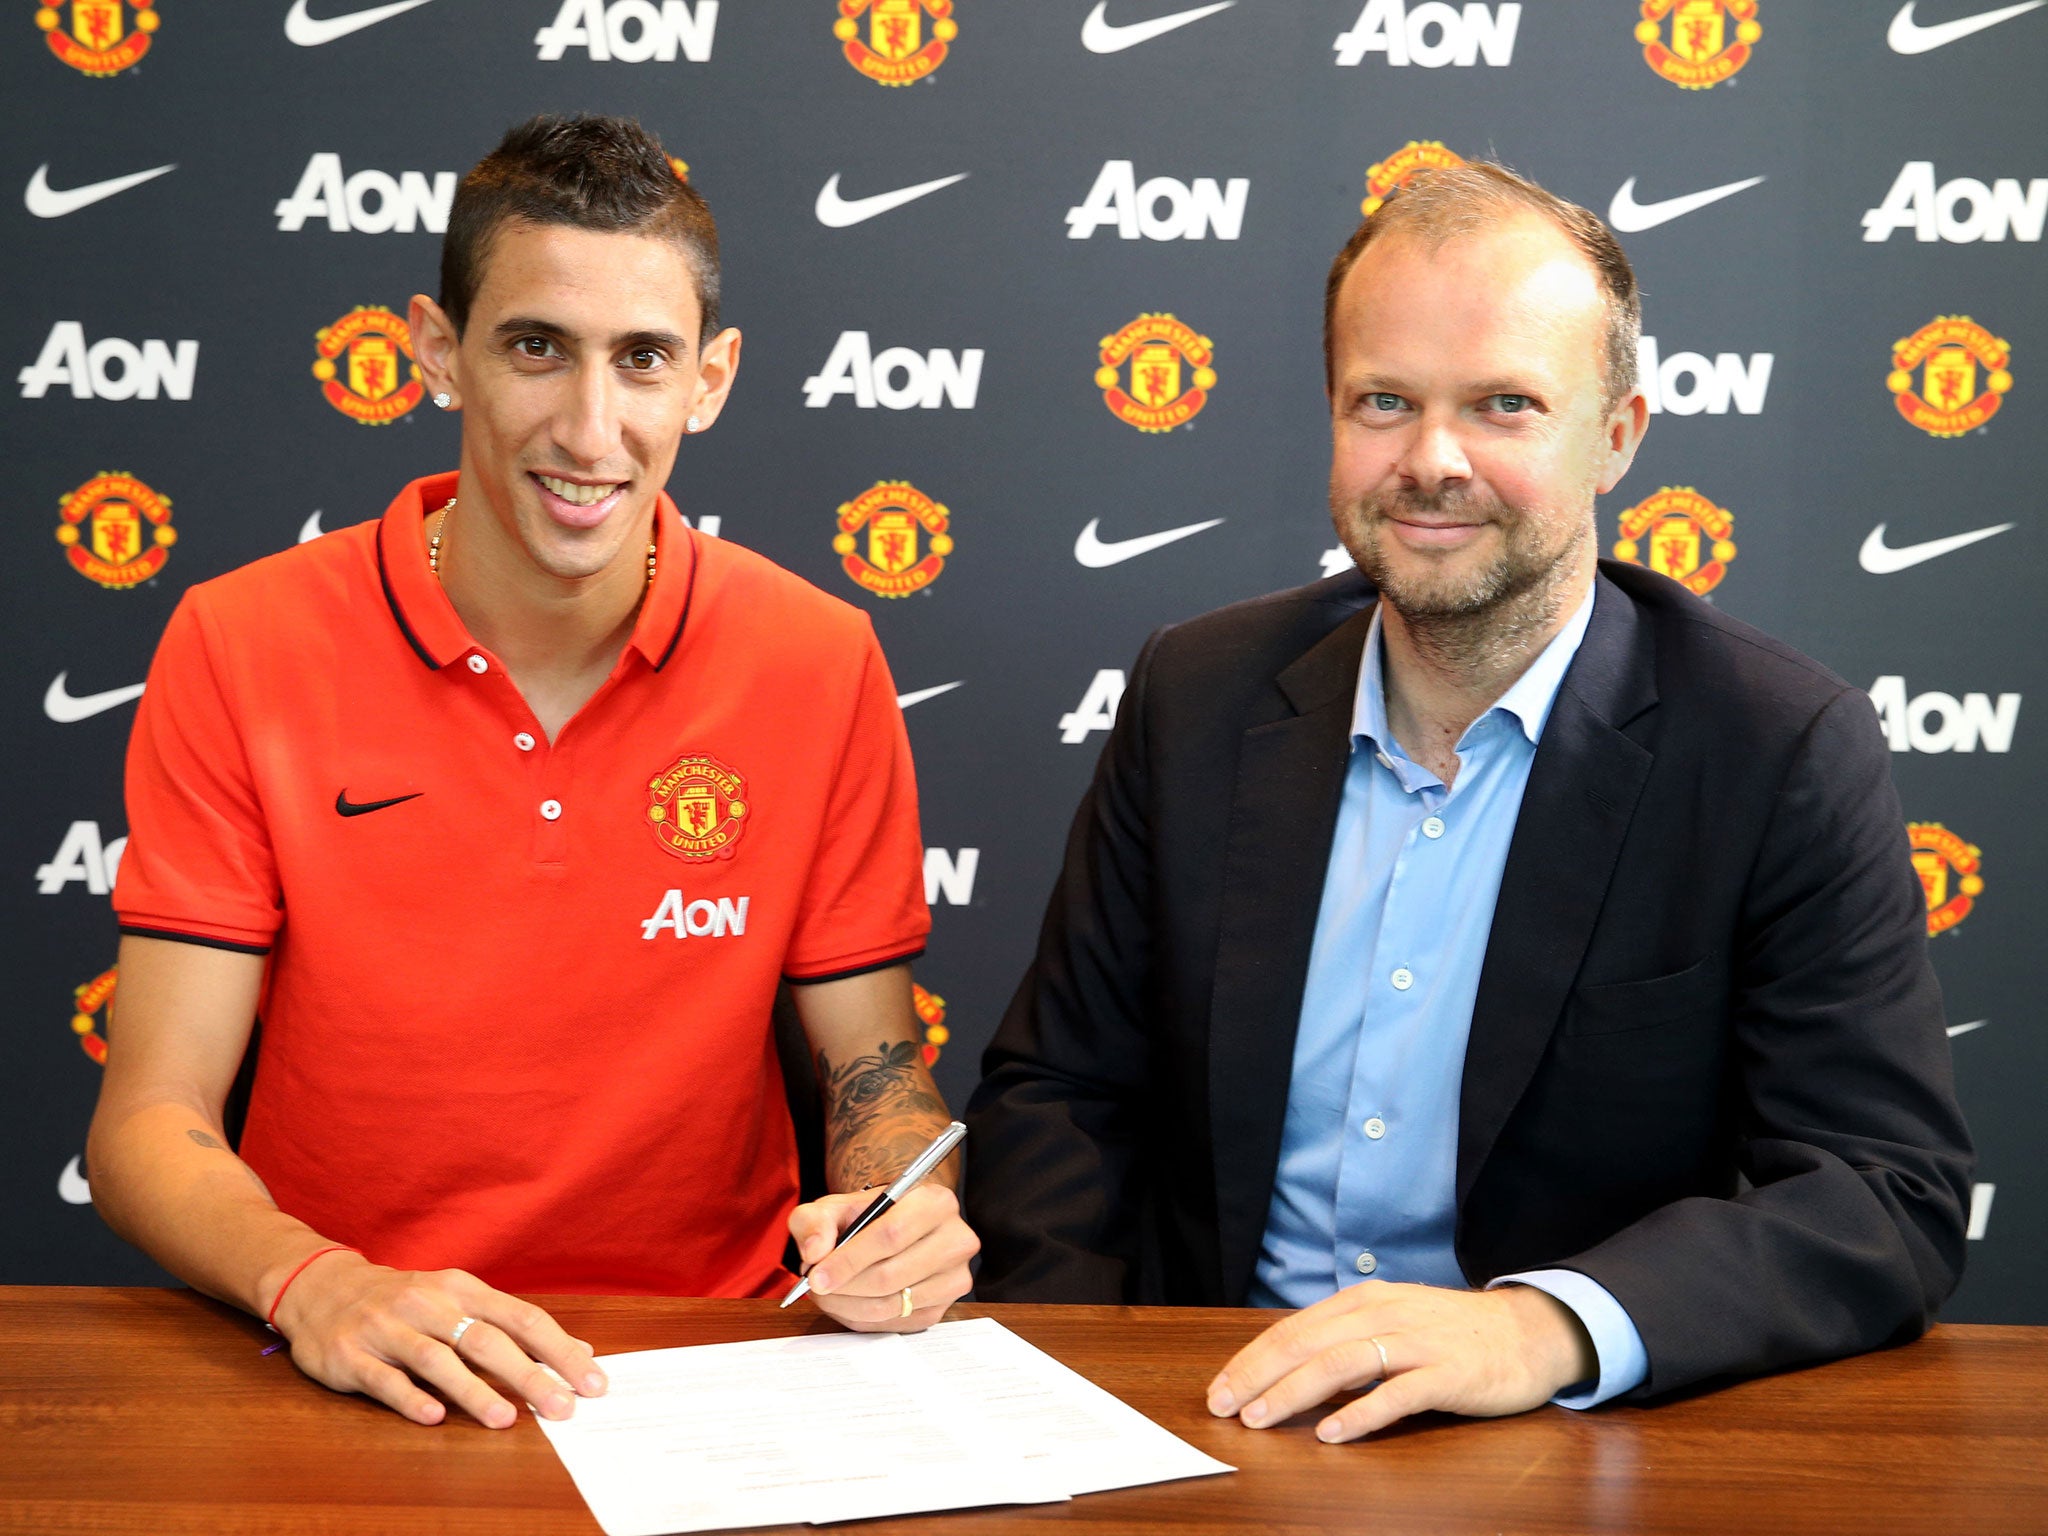 The Manchester United chief executive Ed Woodward (right) with £59.7m signing Angel Di Maria